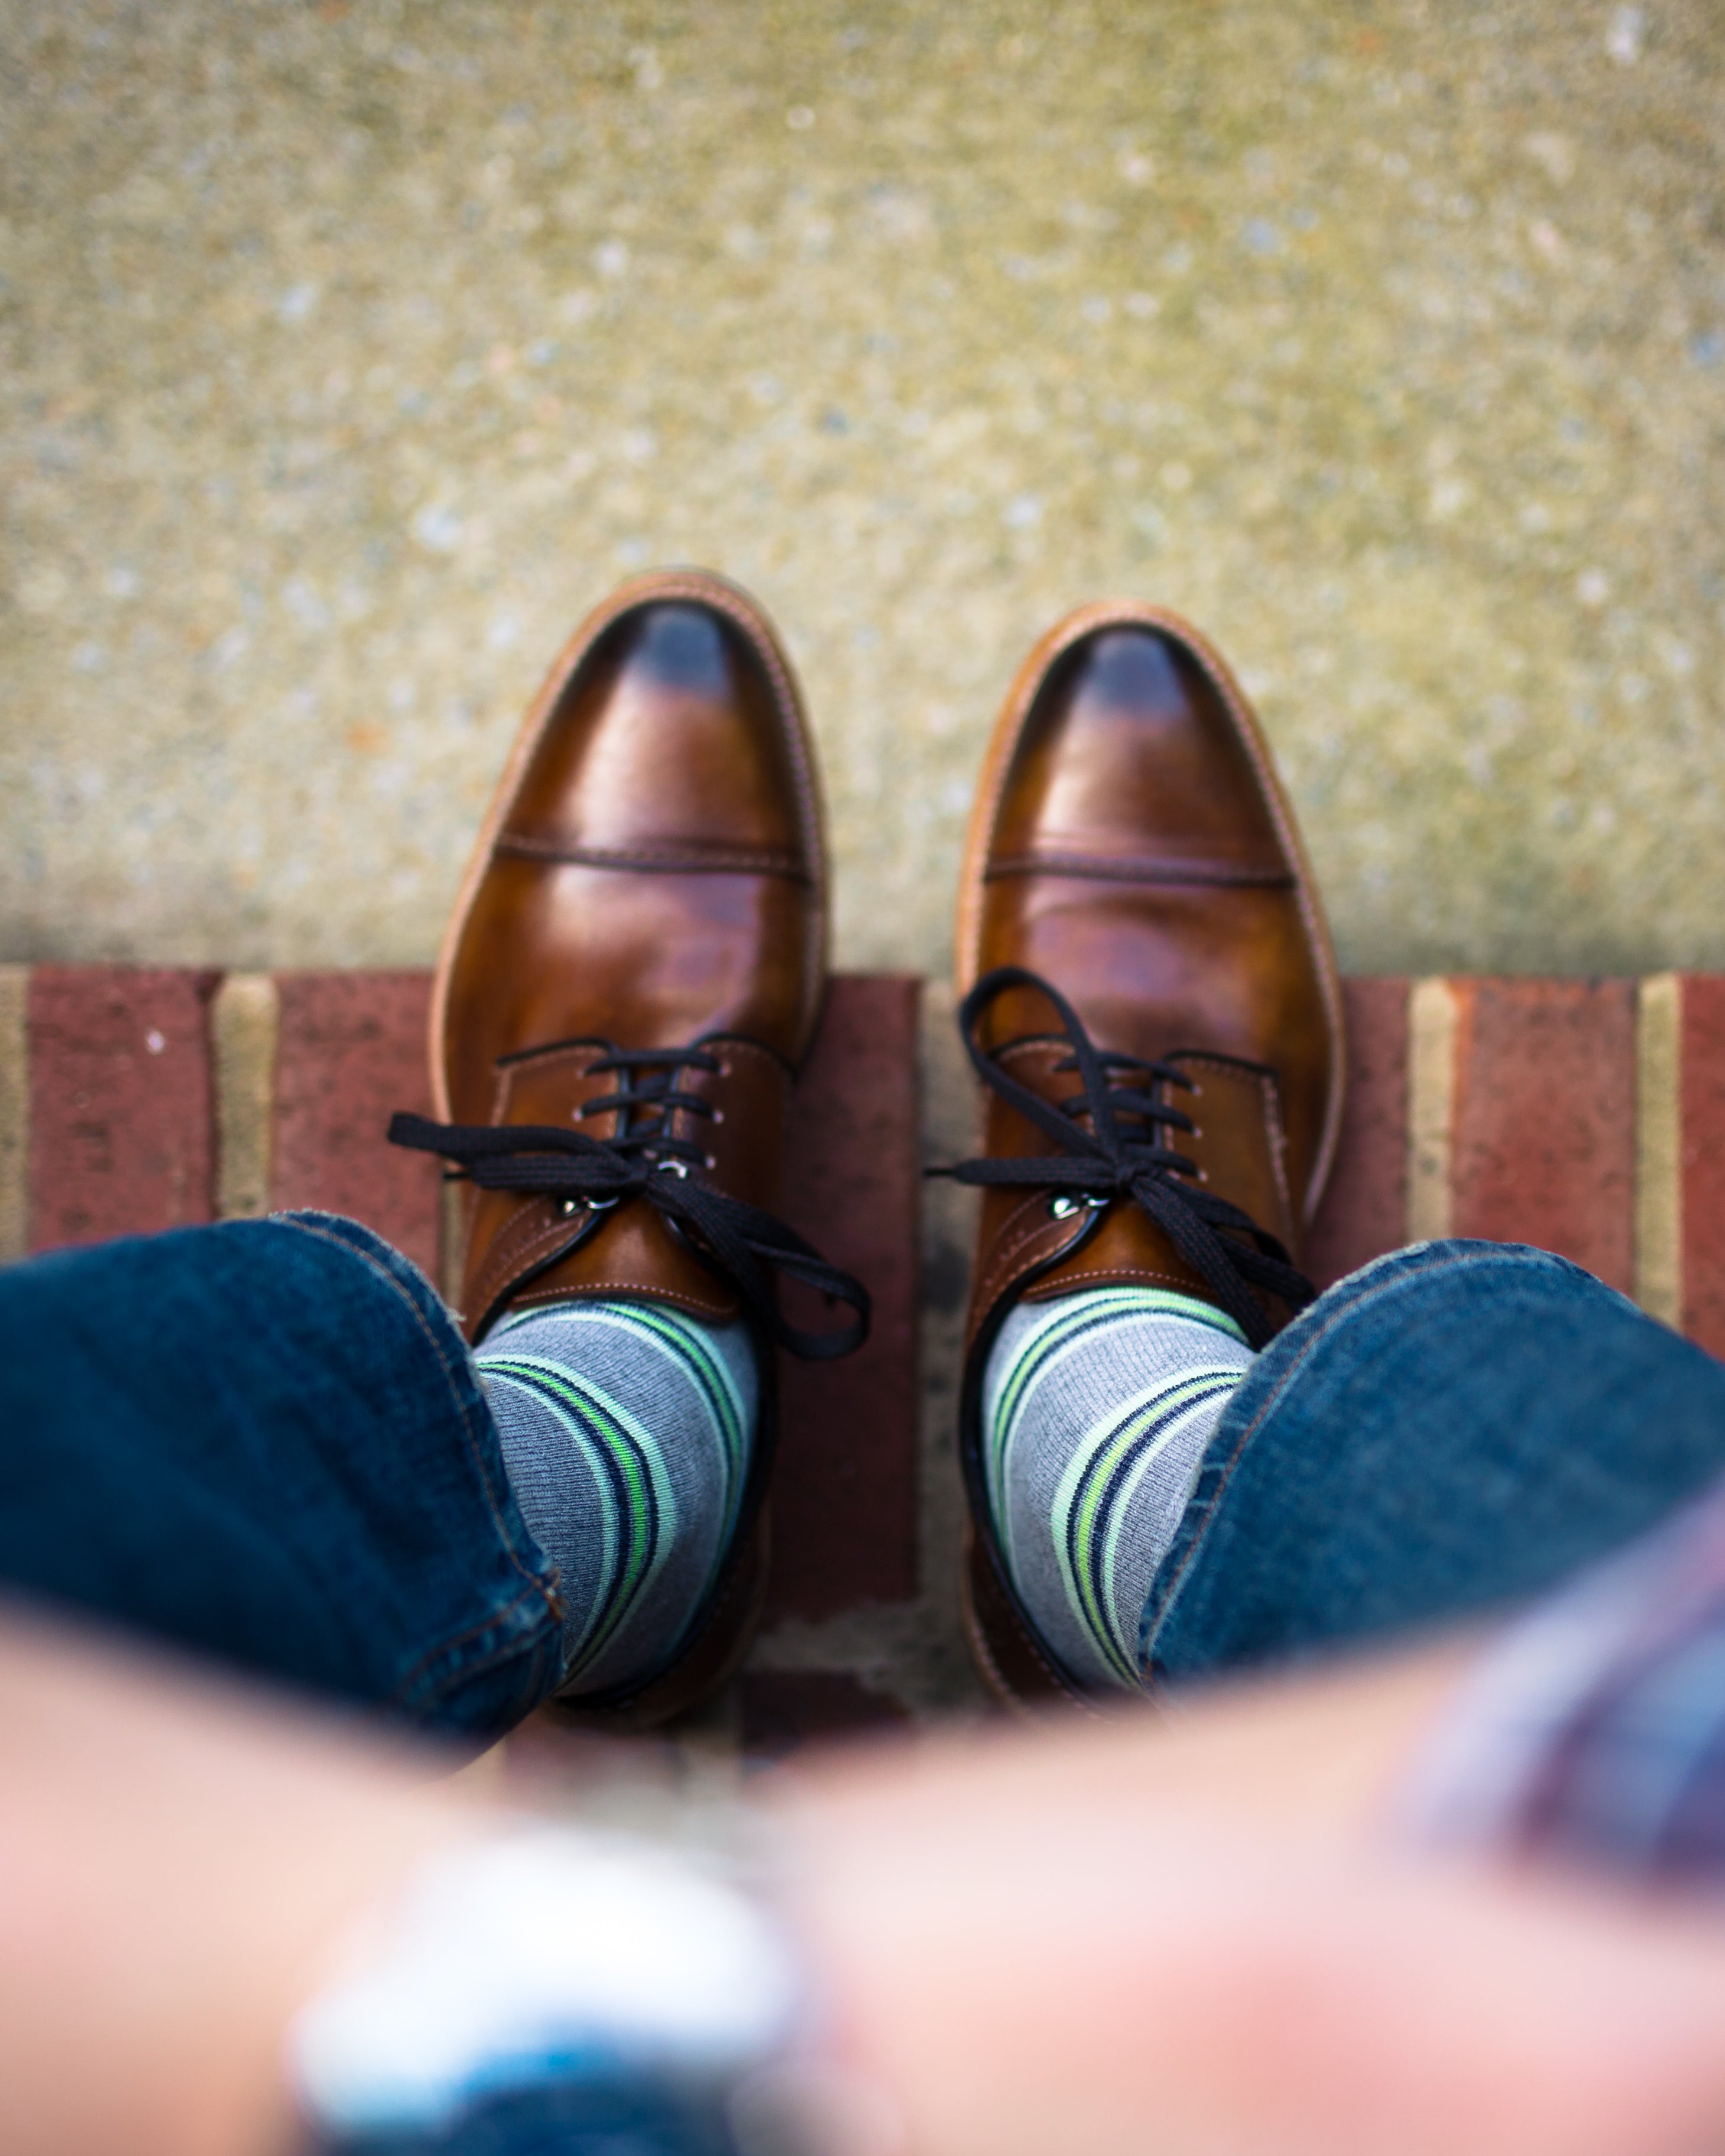 light grey over the calf dress socks with lime green stripes, brown dress shoes, blue jeans